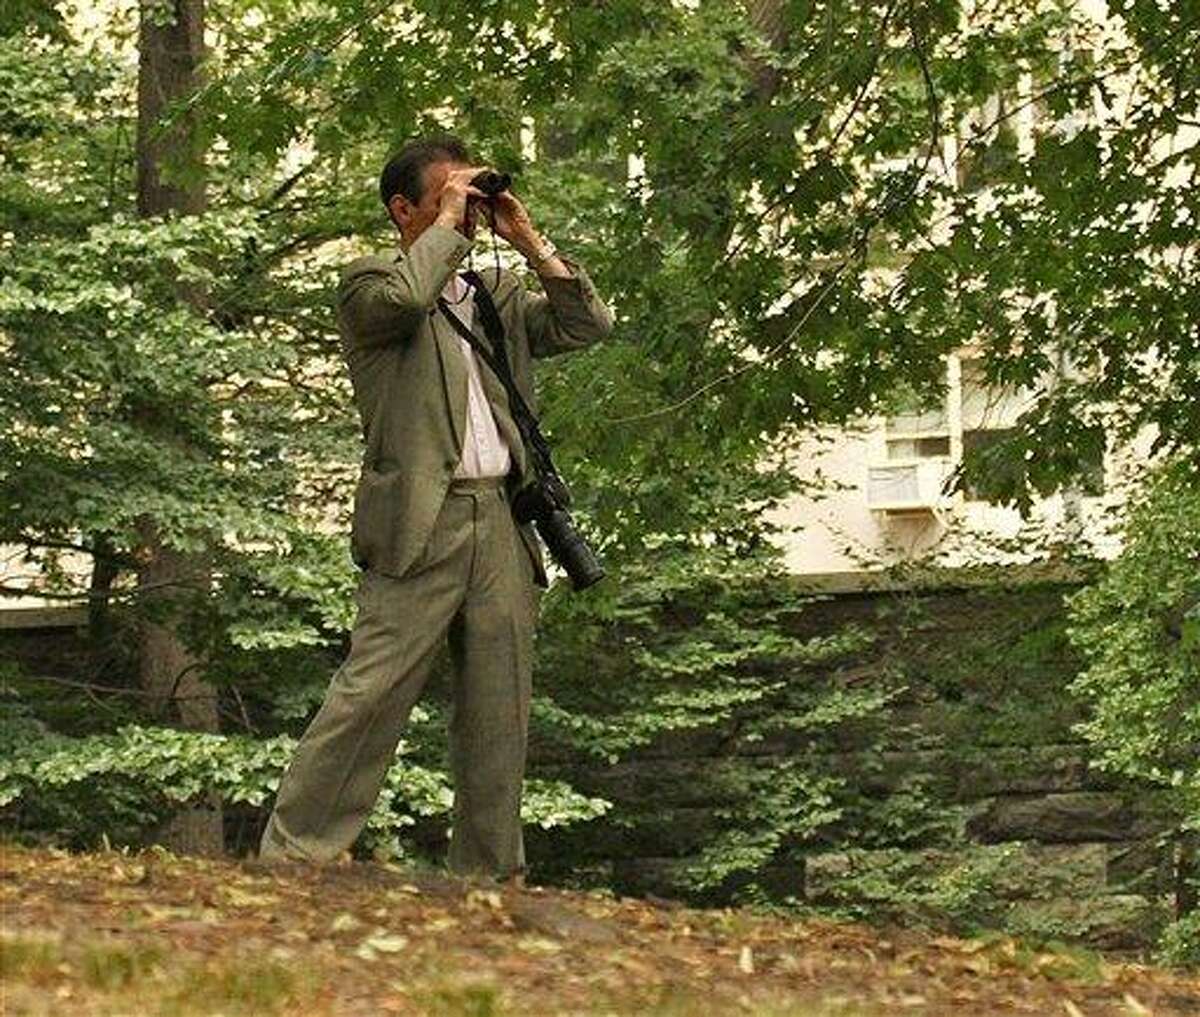 In this June 30, 2012 photo provided by Jean Shum, Jeffrey Johnson uses binoculars to search New York's Central Park for the young offspring of a popular red-tailed Hawk that local birdwatchers know as Pale Male. On Friday, Aug. 24, 2012, Johnson killed a former employer outside the Empire State Building in New York and was himself killed shortly afterwards by police. Nine bystanders were wounded in that chaotic confrontation. (AP Photo/Jean M. Shum) MANDATORY CREDIT